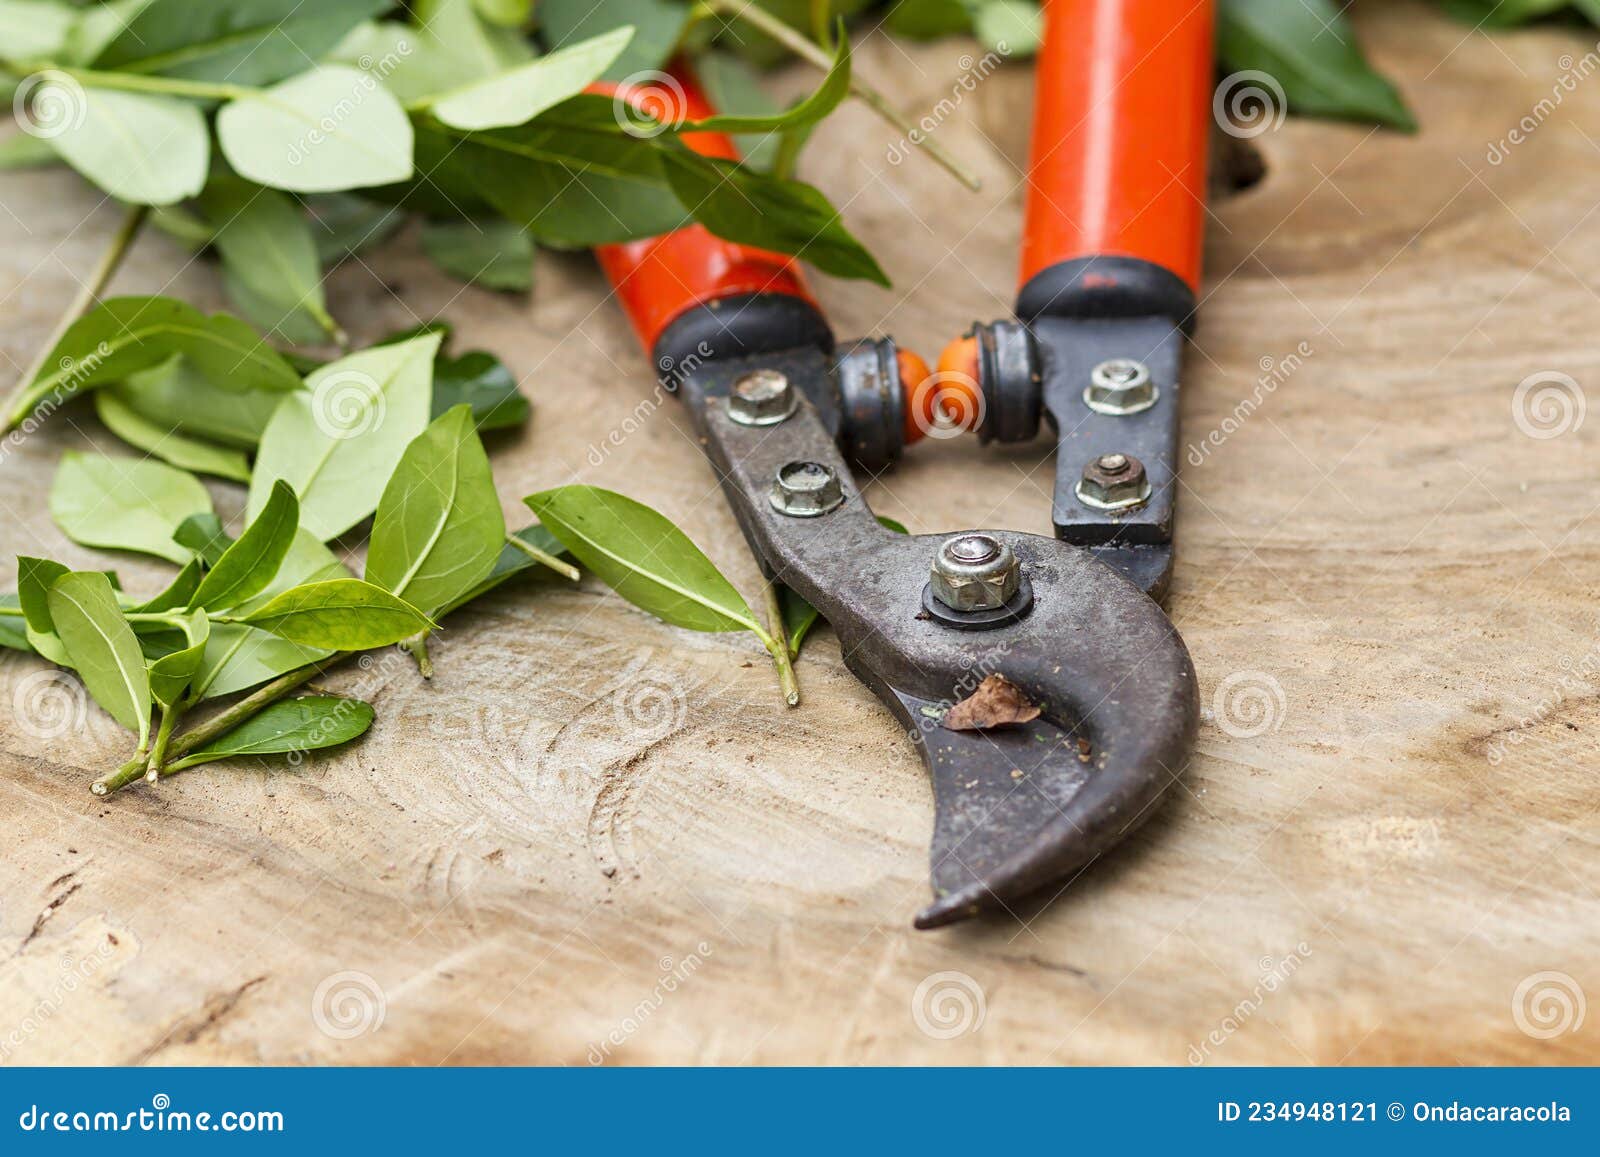 red pruning shears